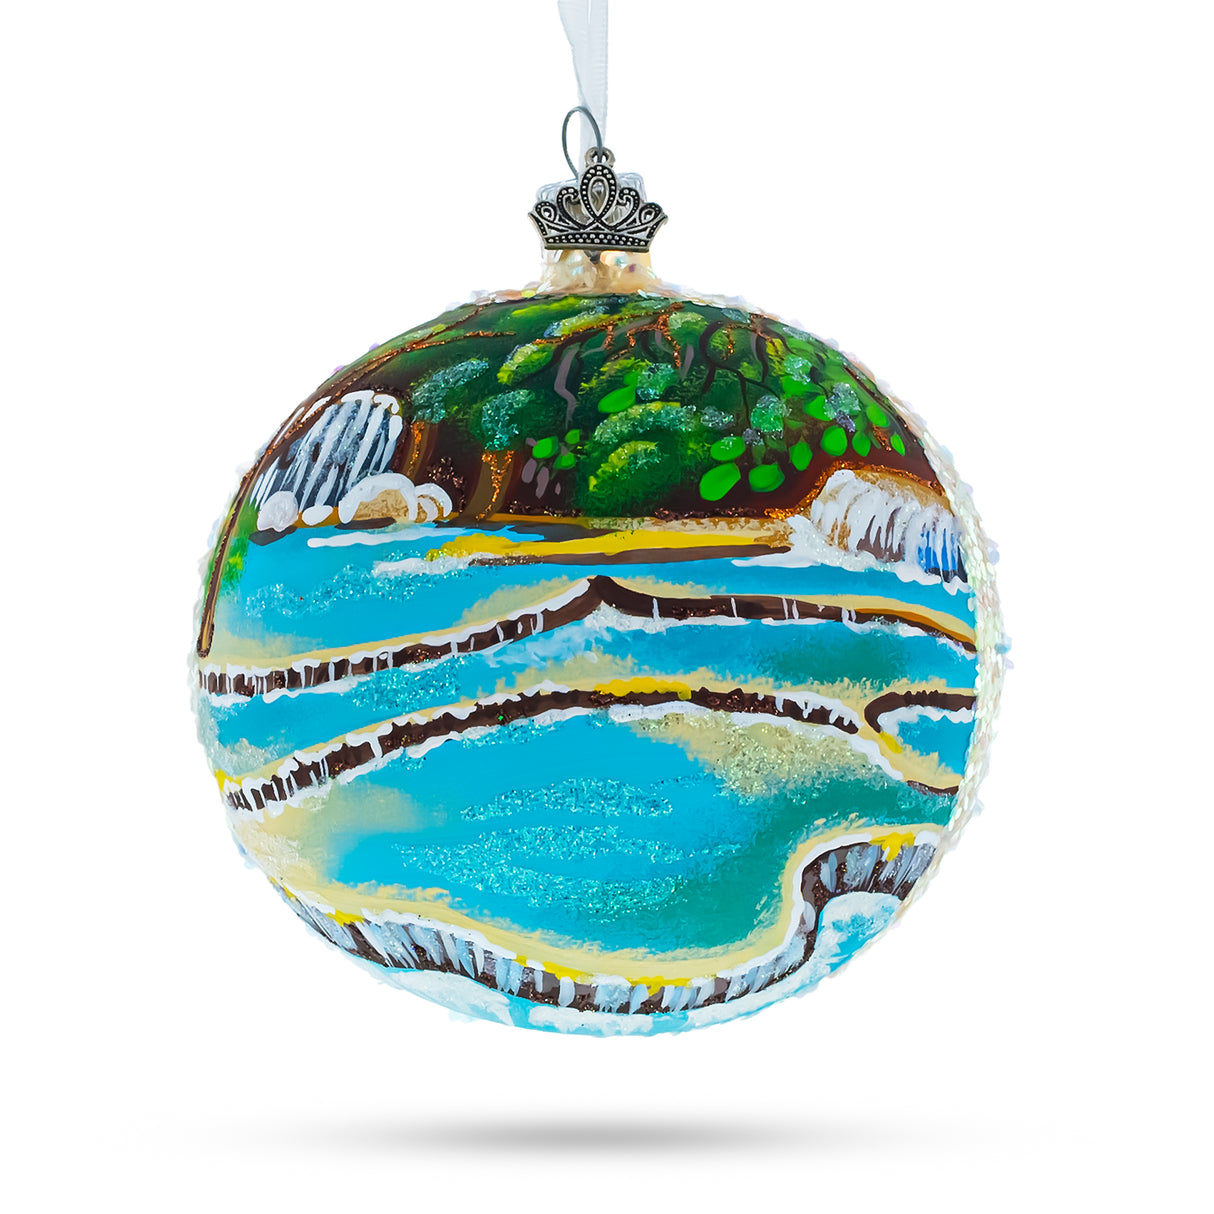 Kuang Si Waterfall, Laos Glass Ball Christmas Ornament 4 Inches in Multi color, Round shape